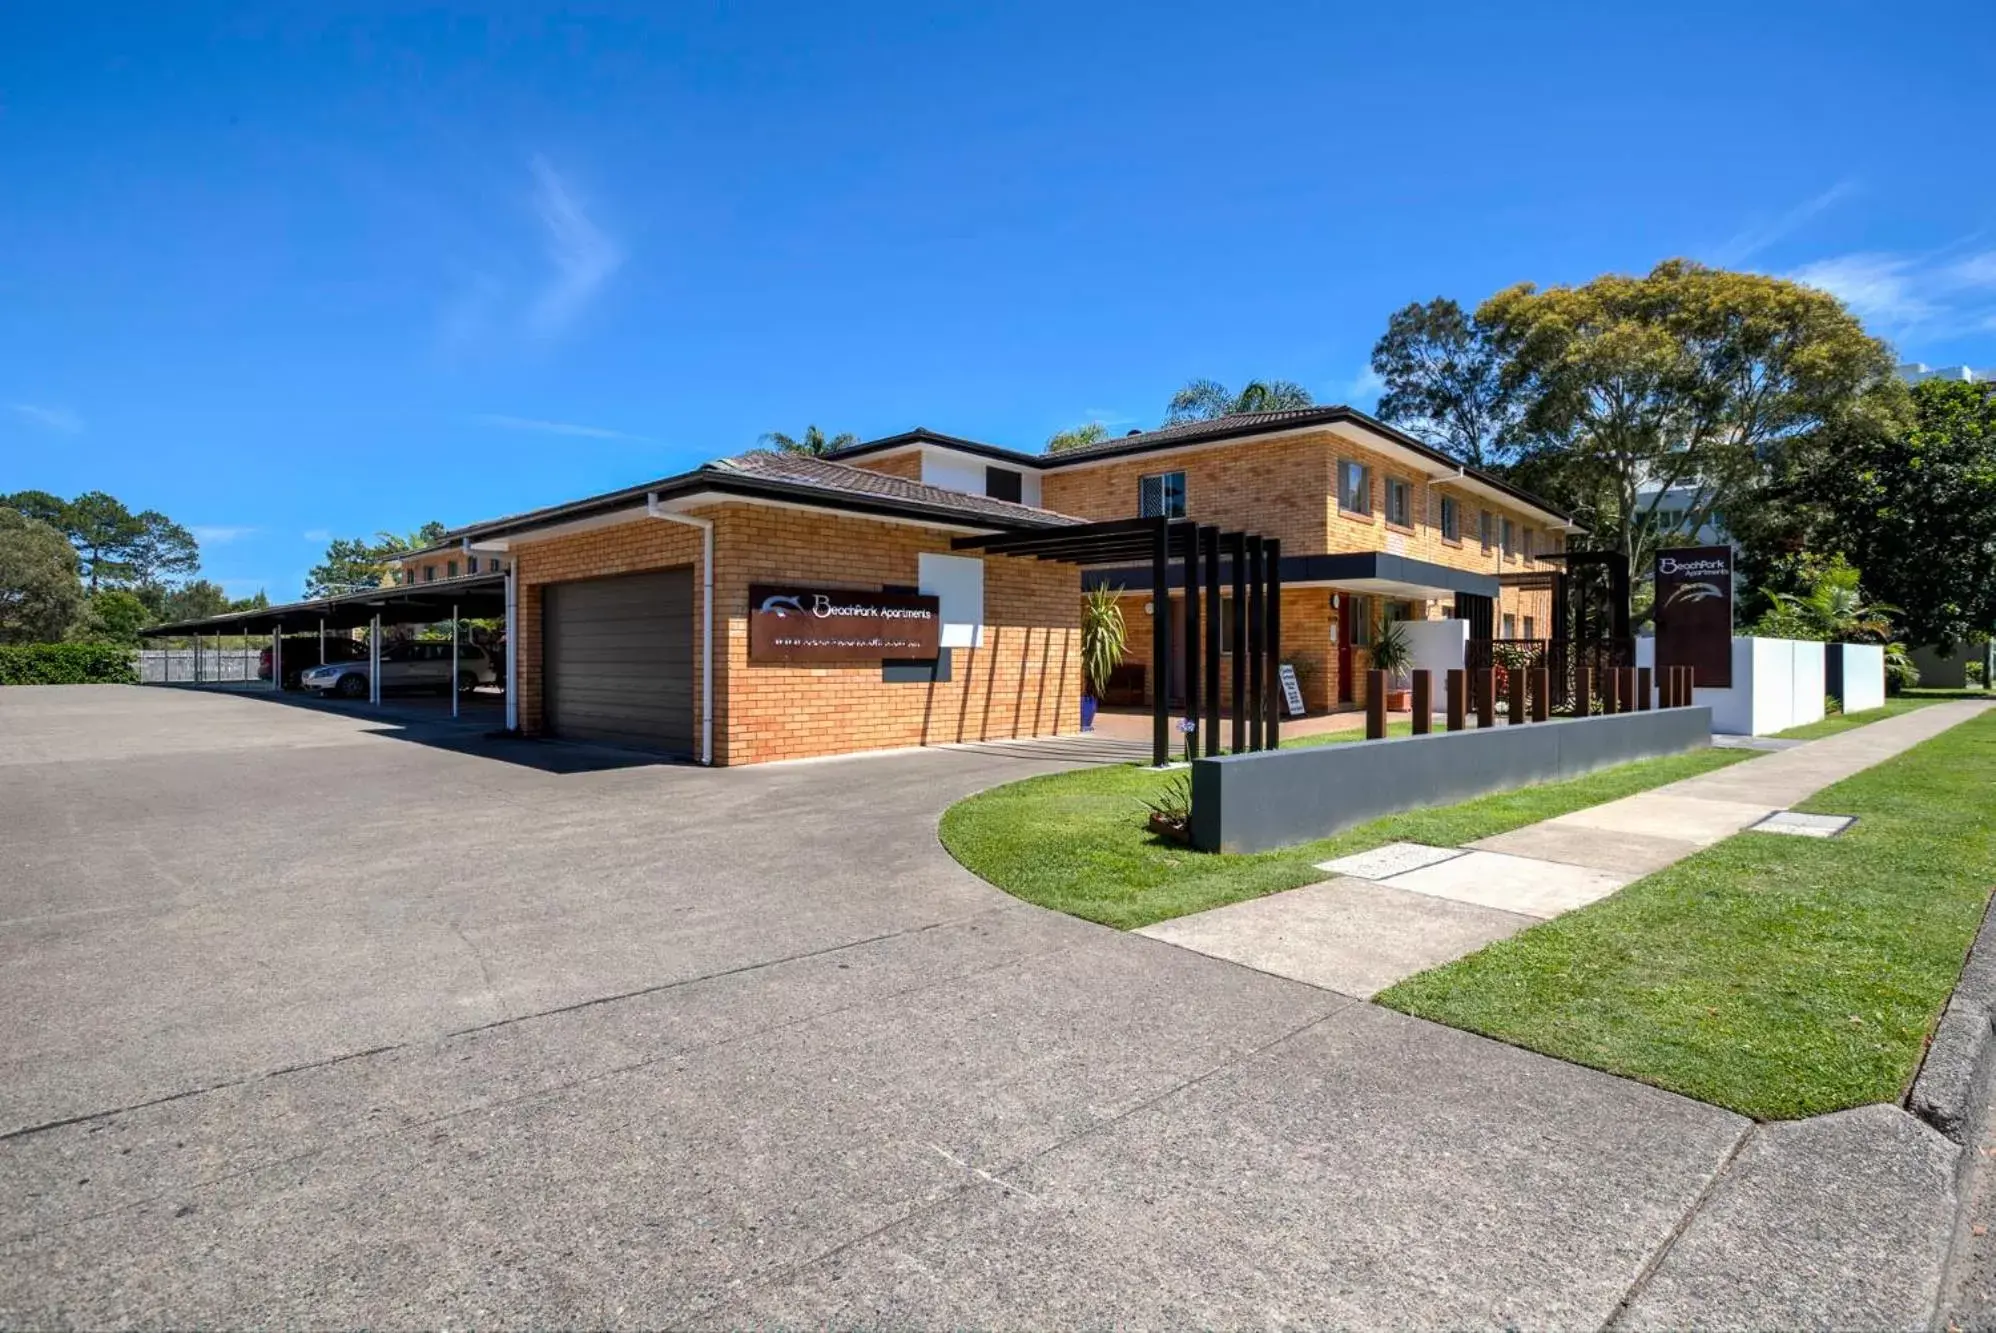 Property Building in Beachpark Apartments Coffs Harbour